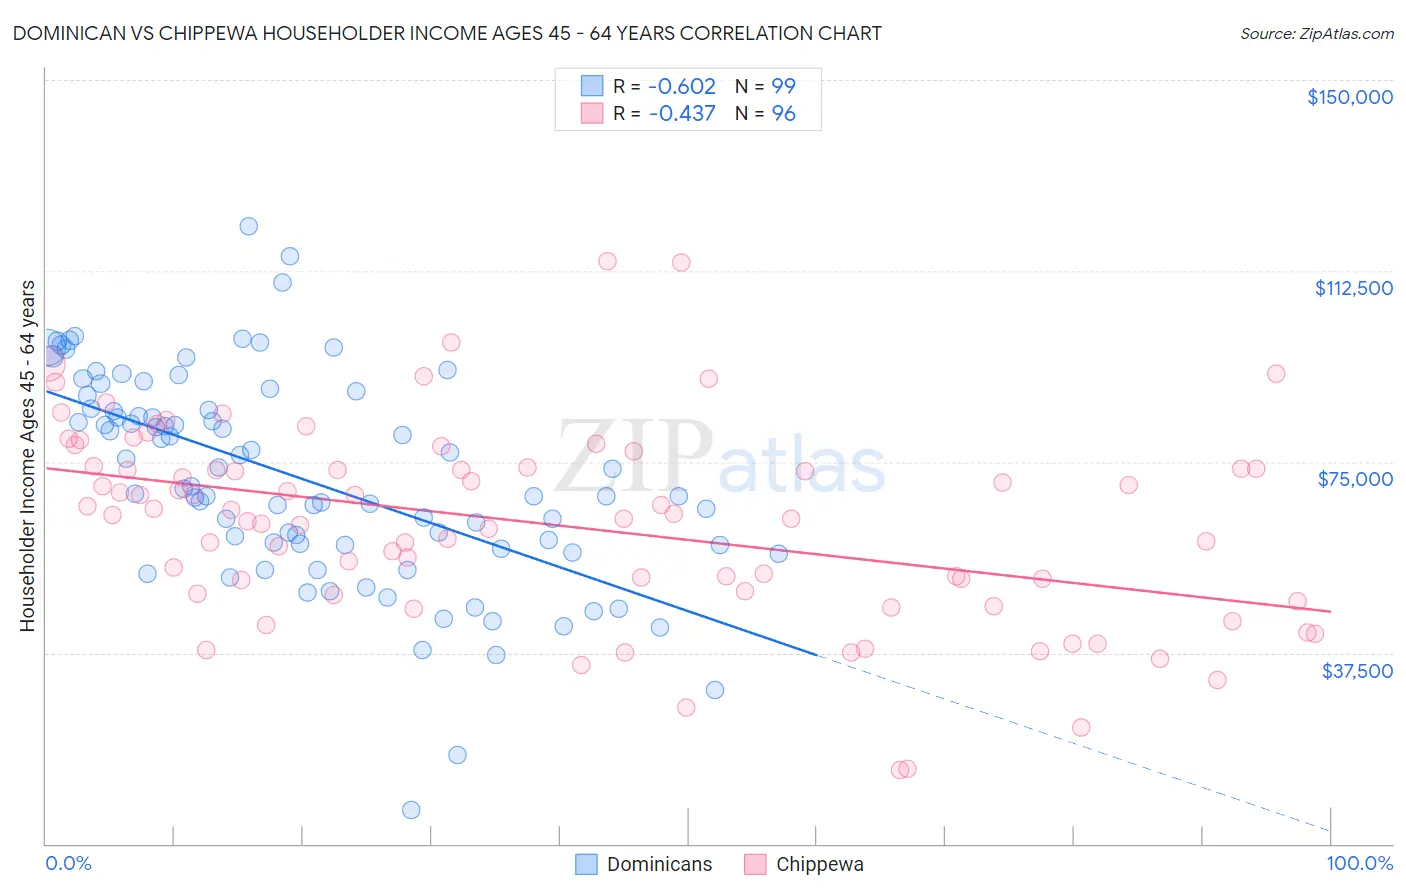 Dominican vs Chippewa Householder Income Ages 45 - 64 years